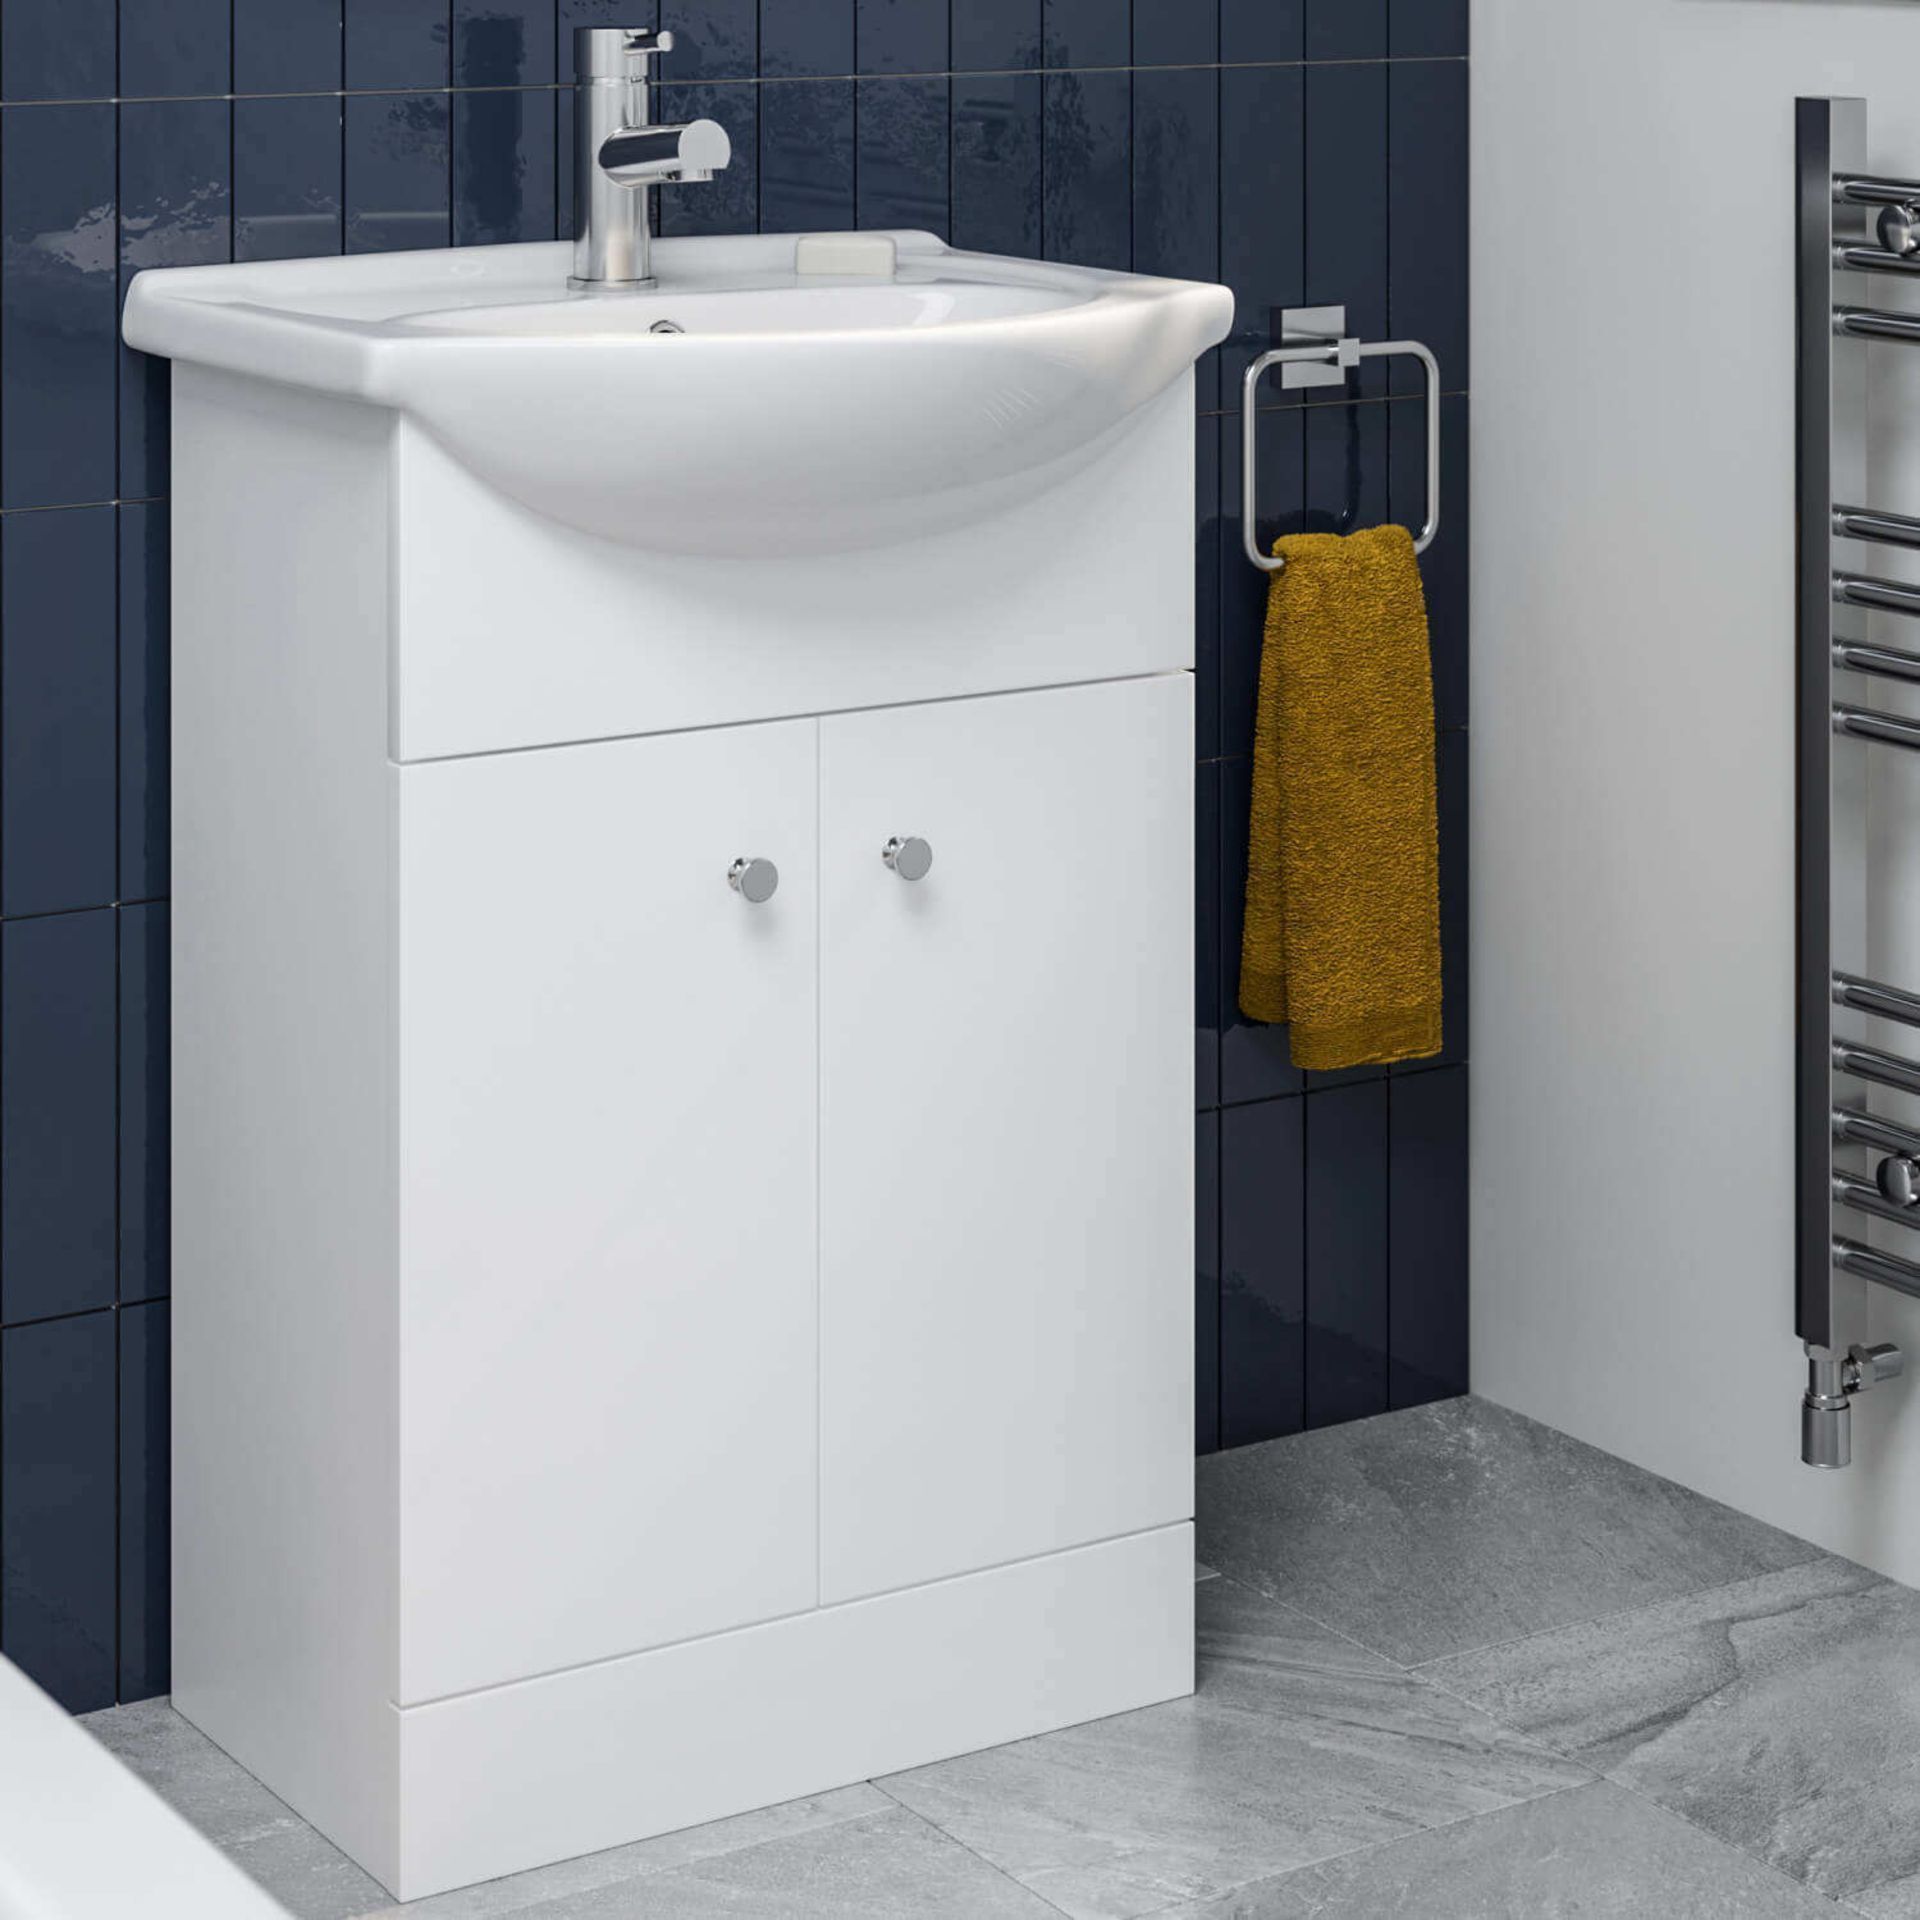 New & Boxed 550mm Quartz Basin Sink Vanity Unit Floor Standing White.RRP £399.99.Comes Complet... - Image 2 of 2